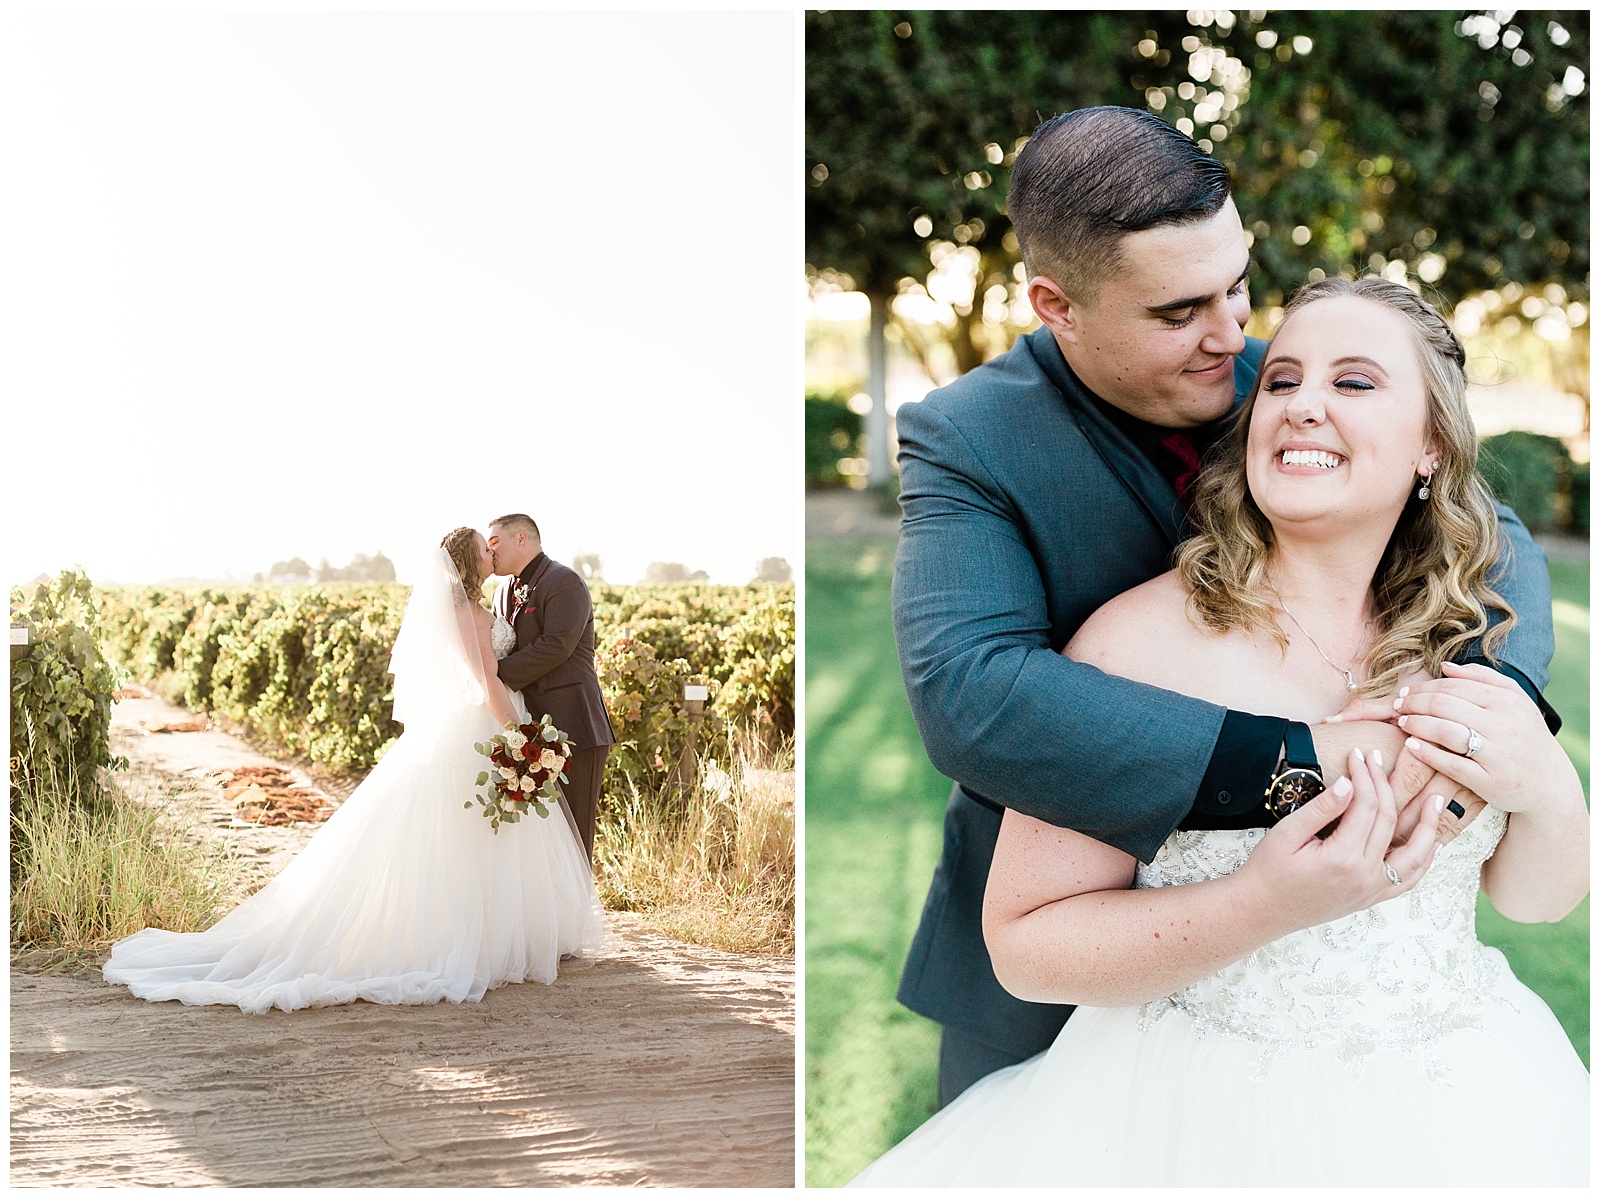 sweet moments between the bride and groom during their formal wedding photos